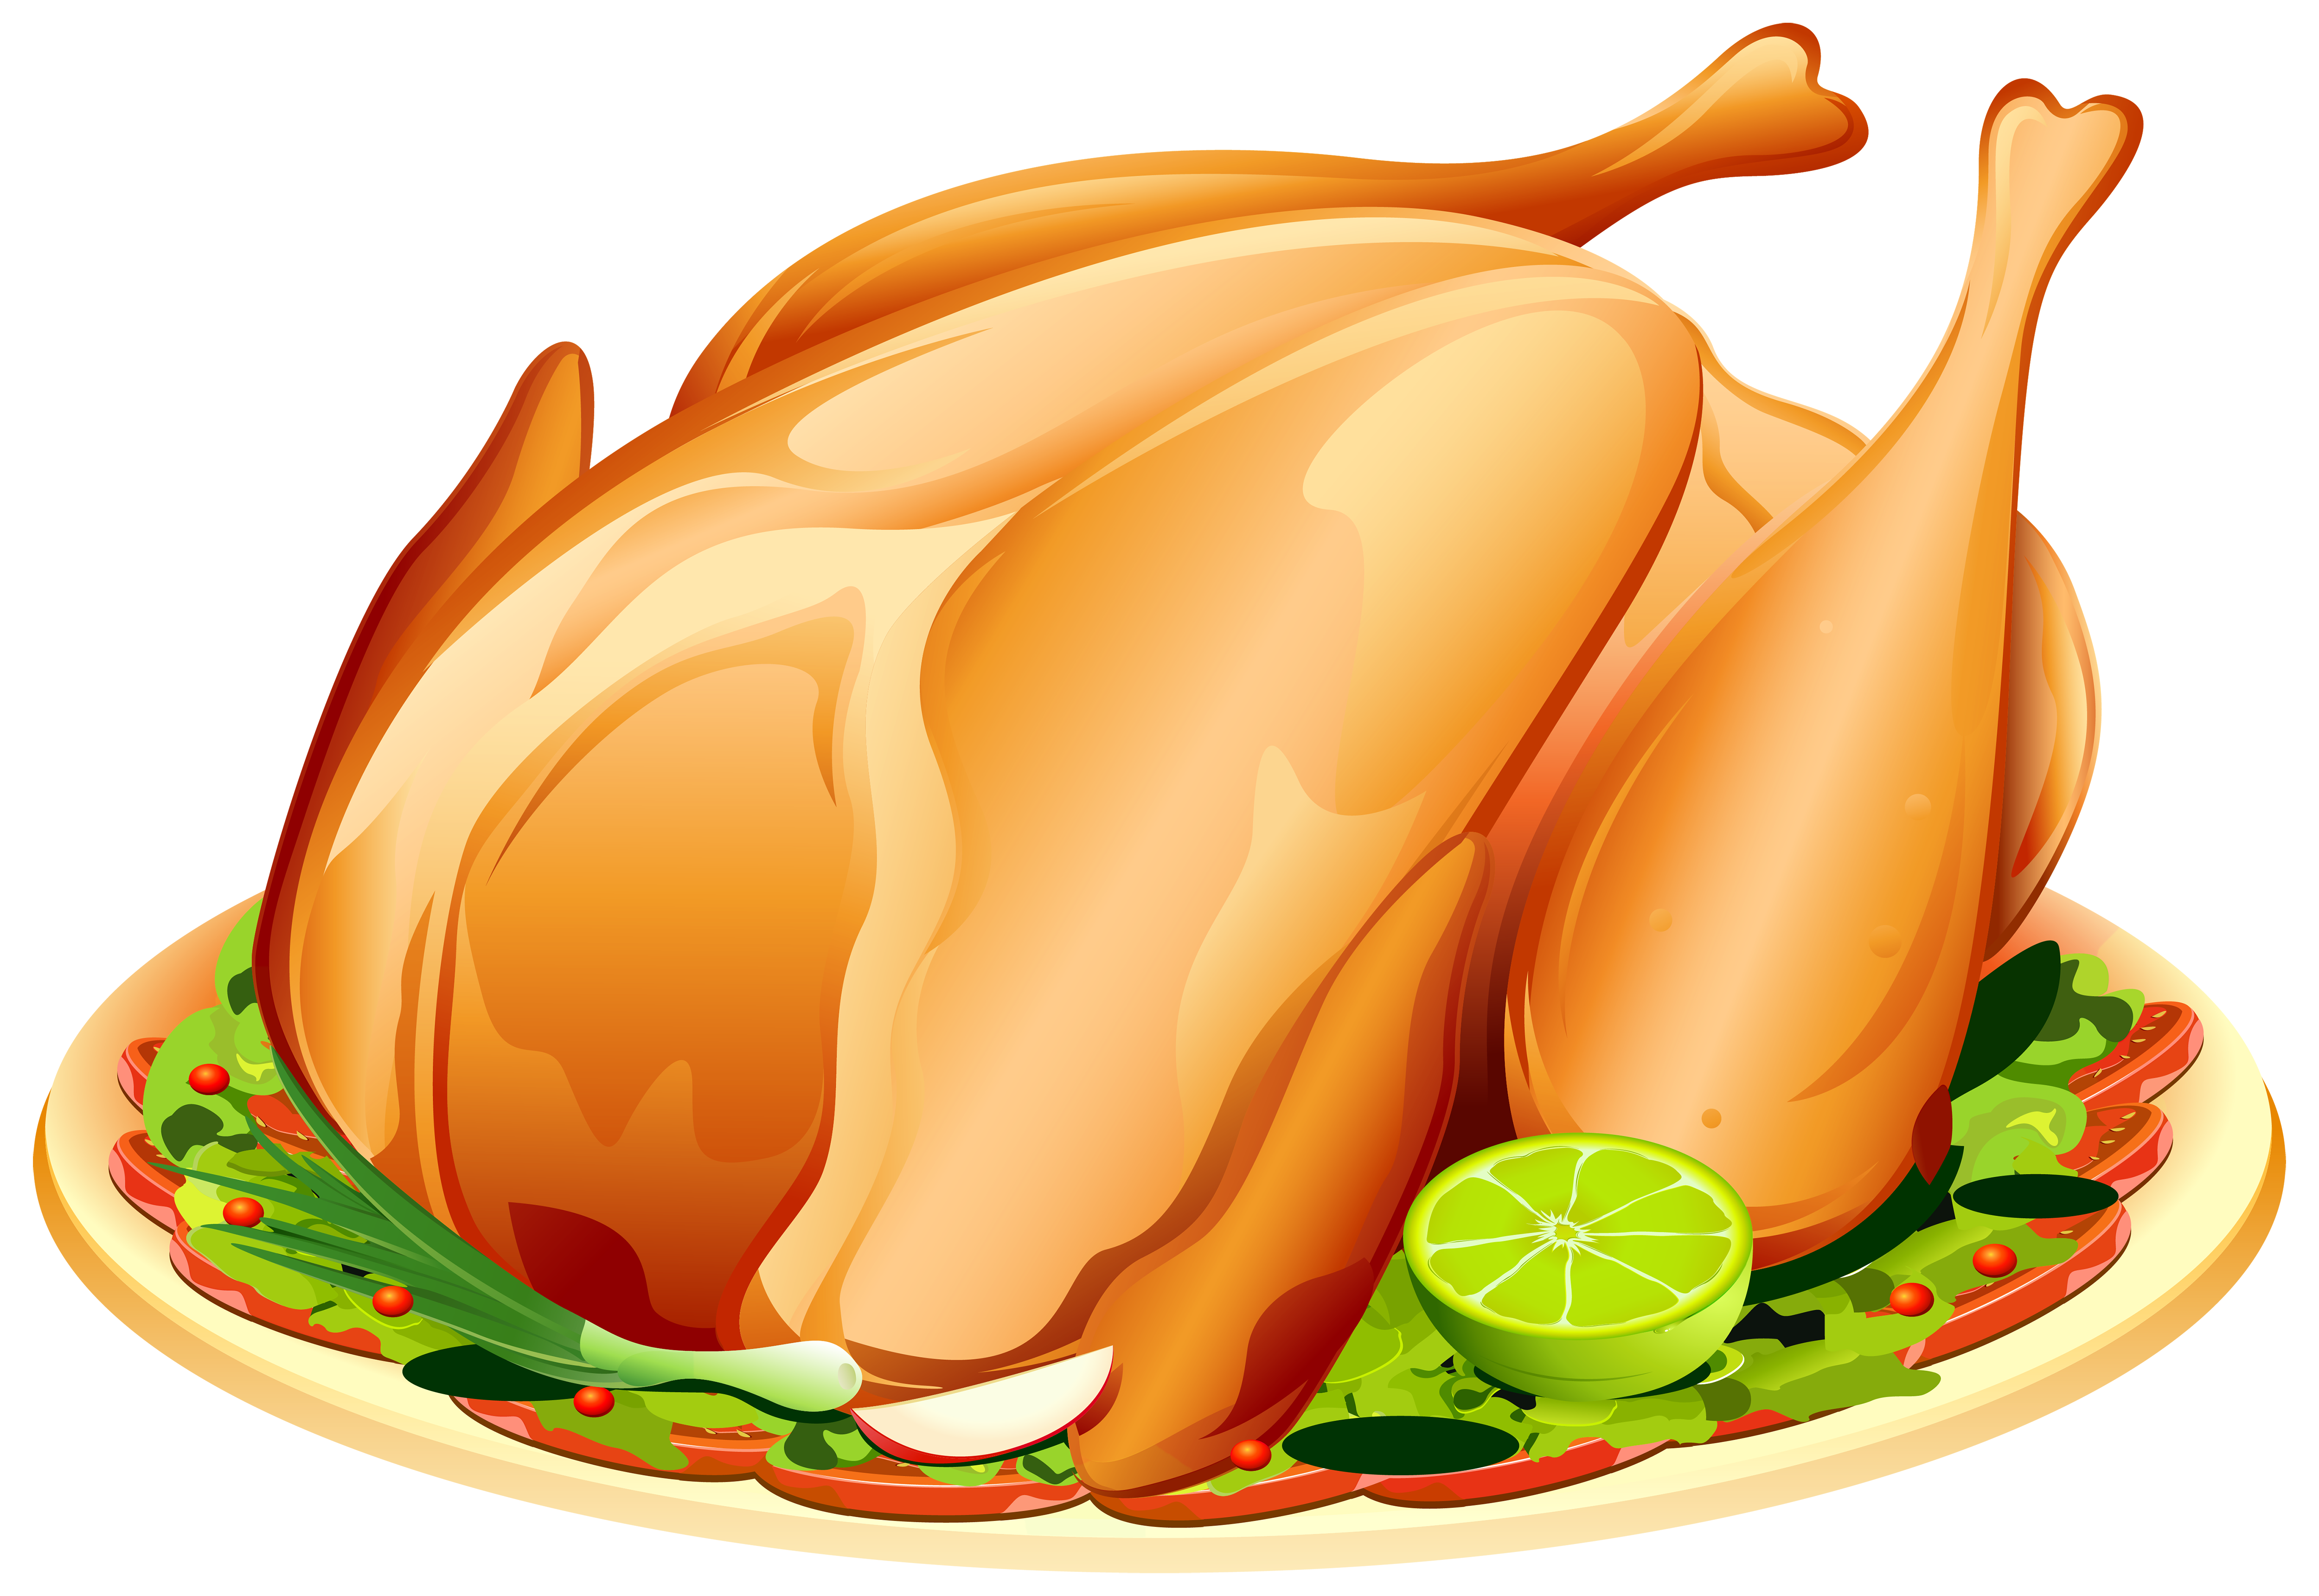 Clip Arts Related To : thanksgiving clipart background. view all Turkey Cli...